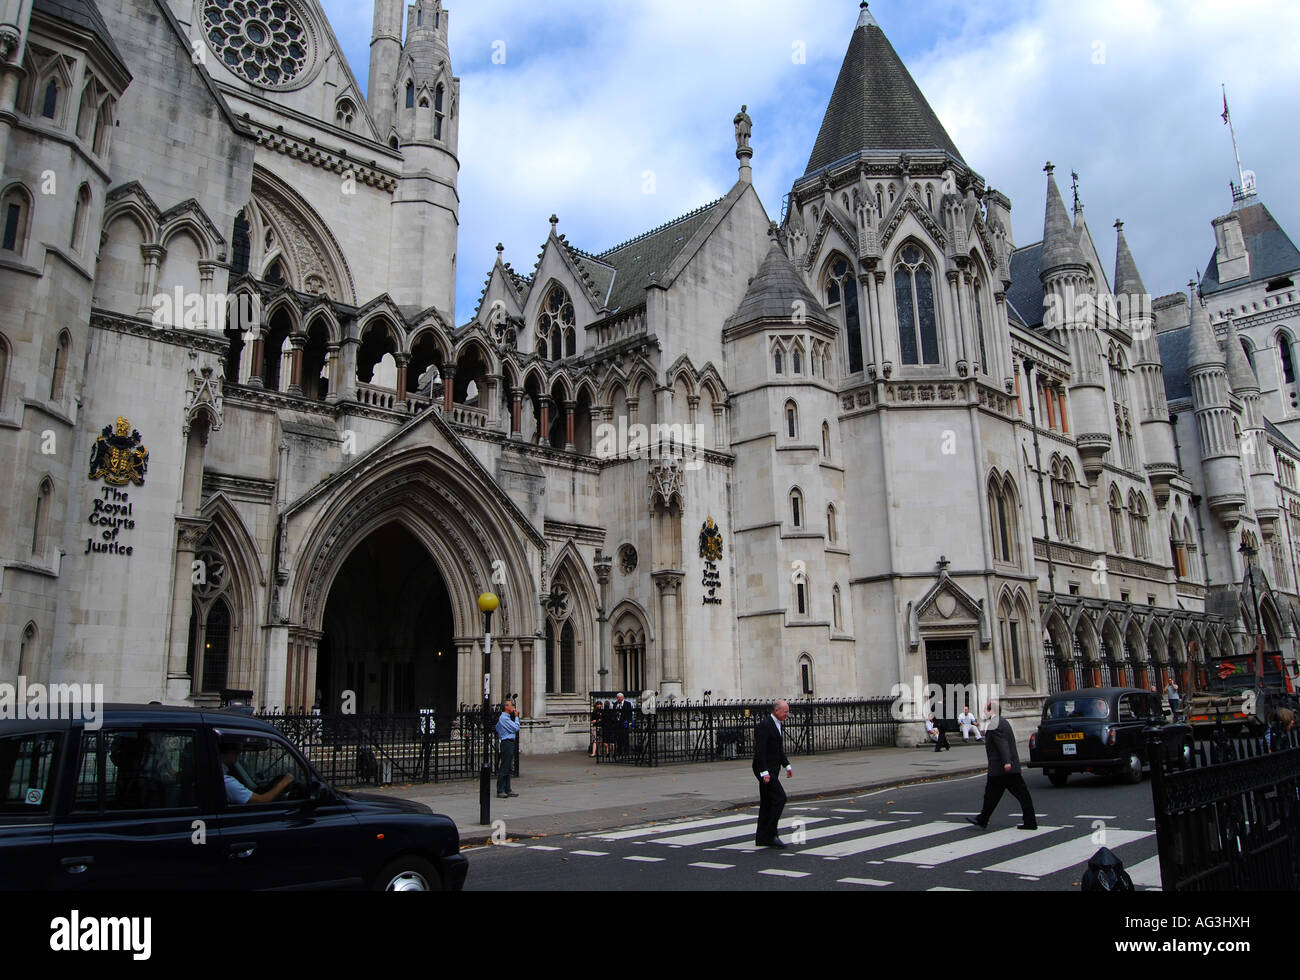 Il Royal Courts of Justice, Londra Foto Stock